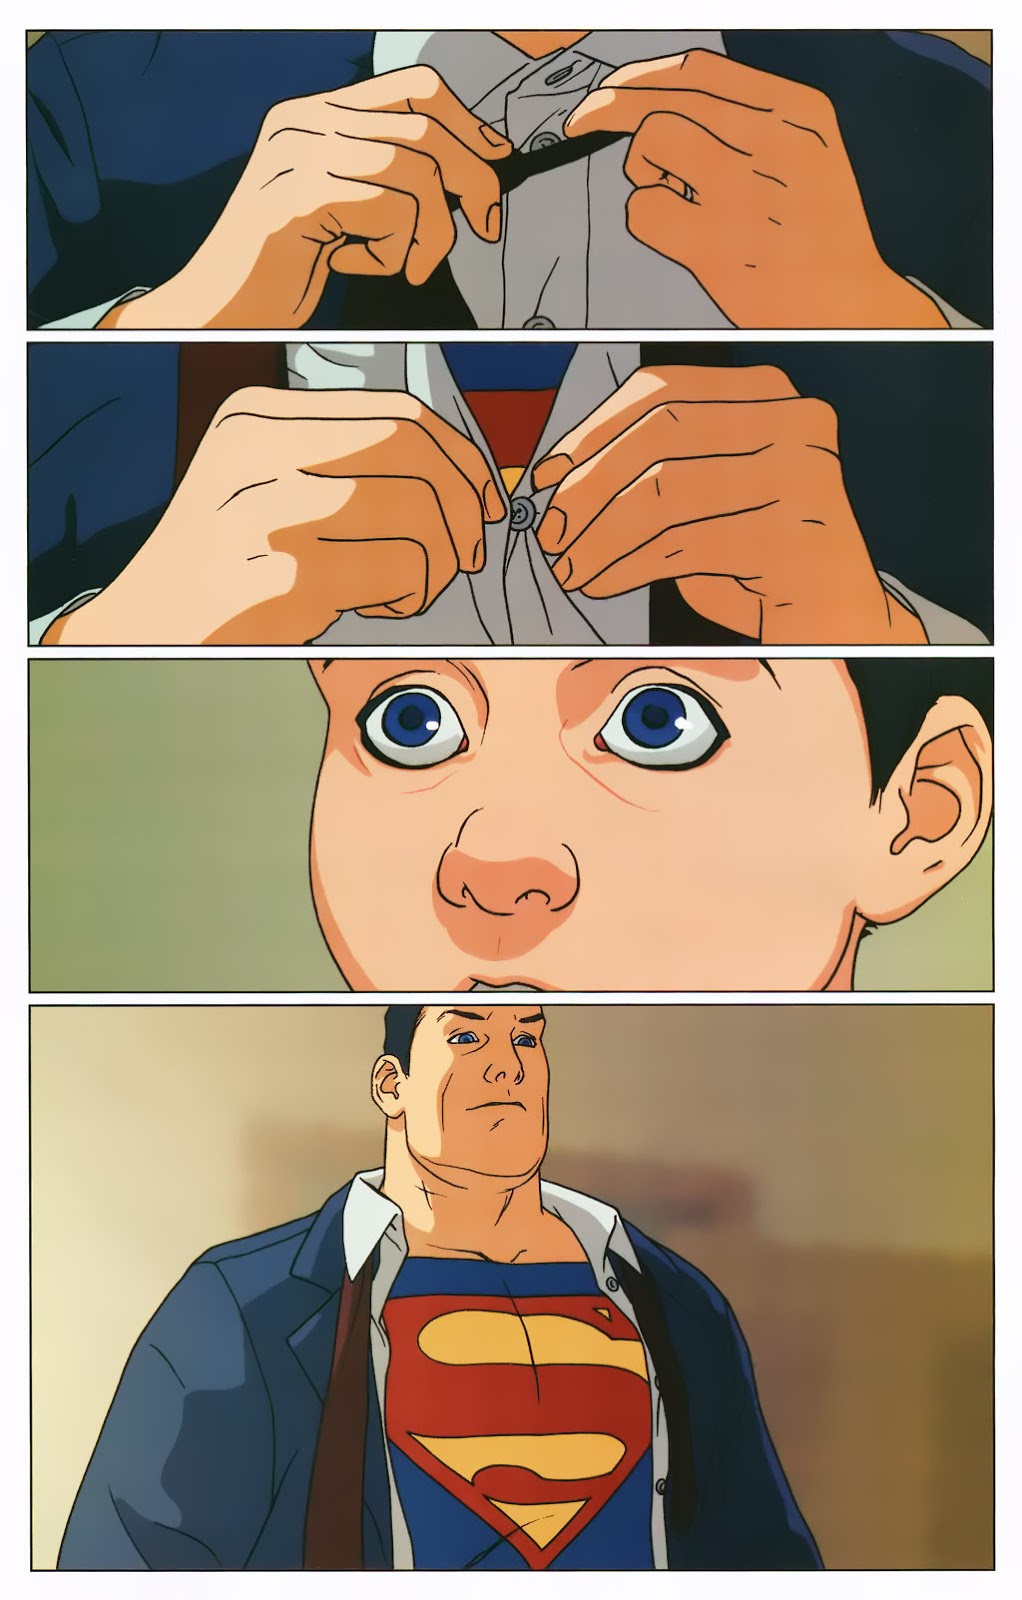 Superman Shares His Secret Identity With Billy Batson (First Thunder)